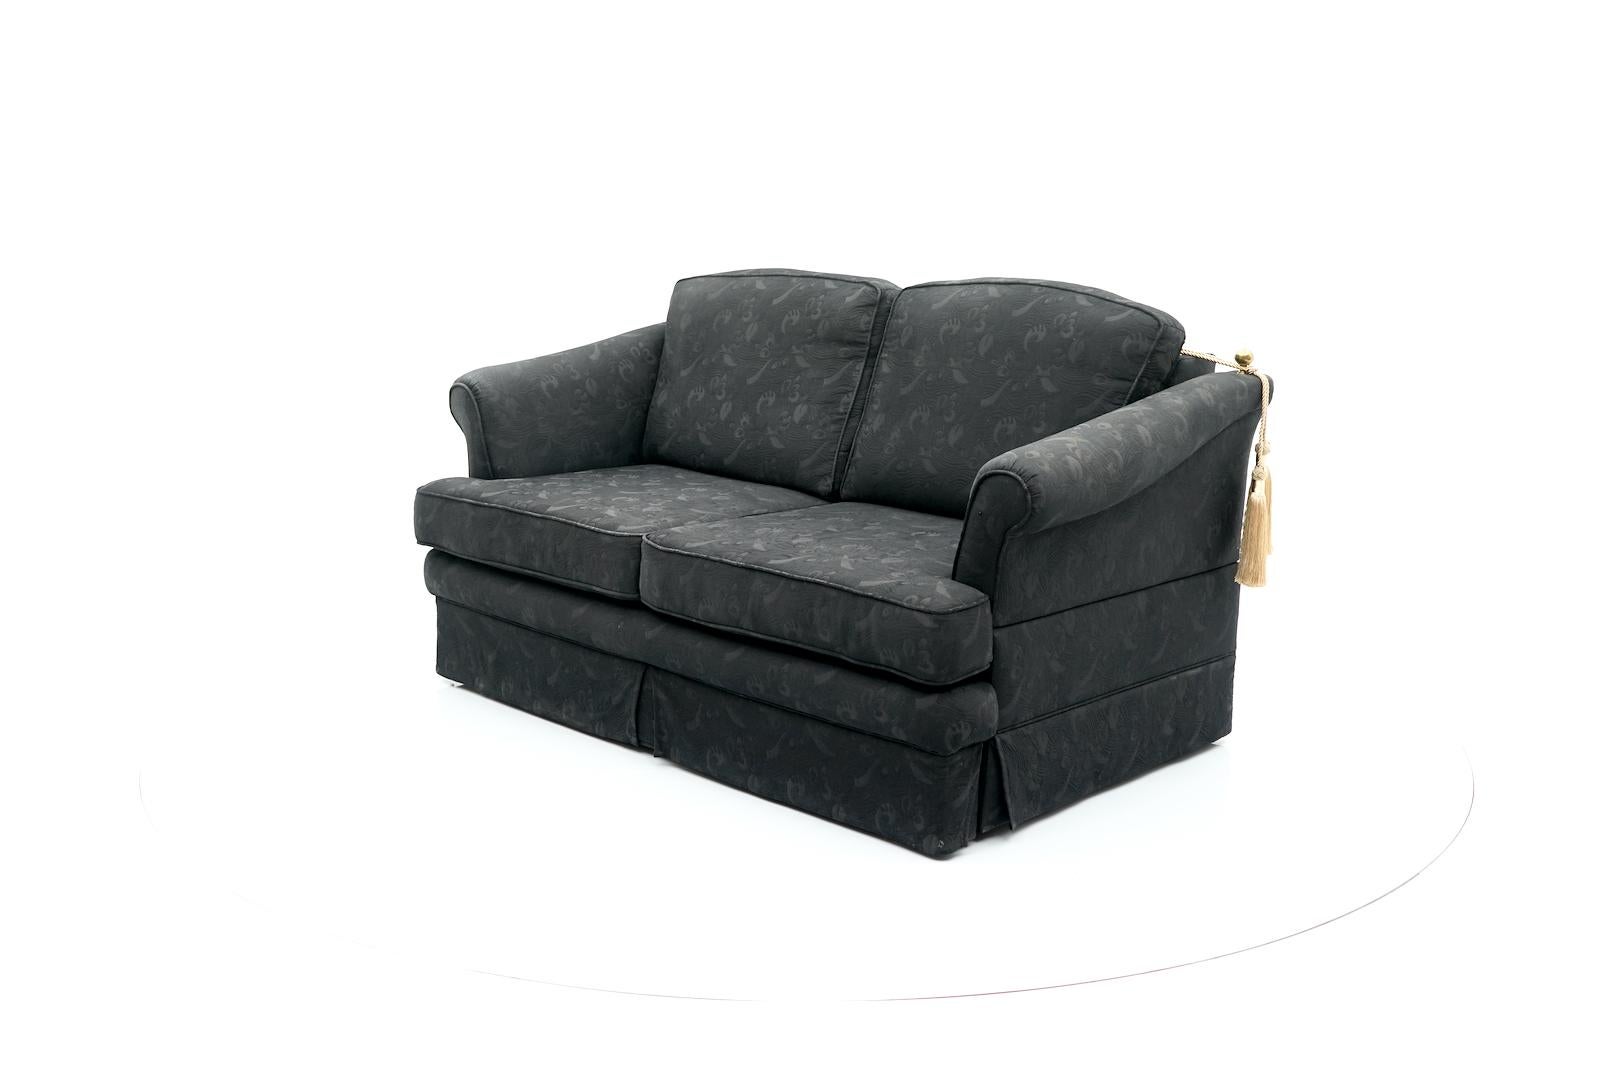 Very comfortable two seater sofa by maison Jansen. The sofa can be pulled out to the guest bed. The handling is very simple. 
The sofa is upholstered in black patterned fabric.

Total width when unfolded 222 cm (87.40 in).
Total length when